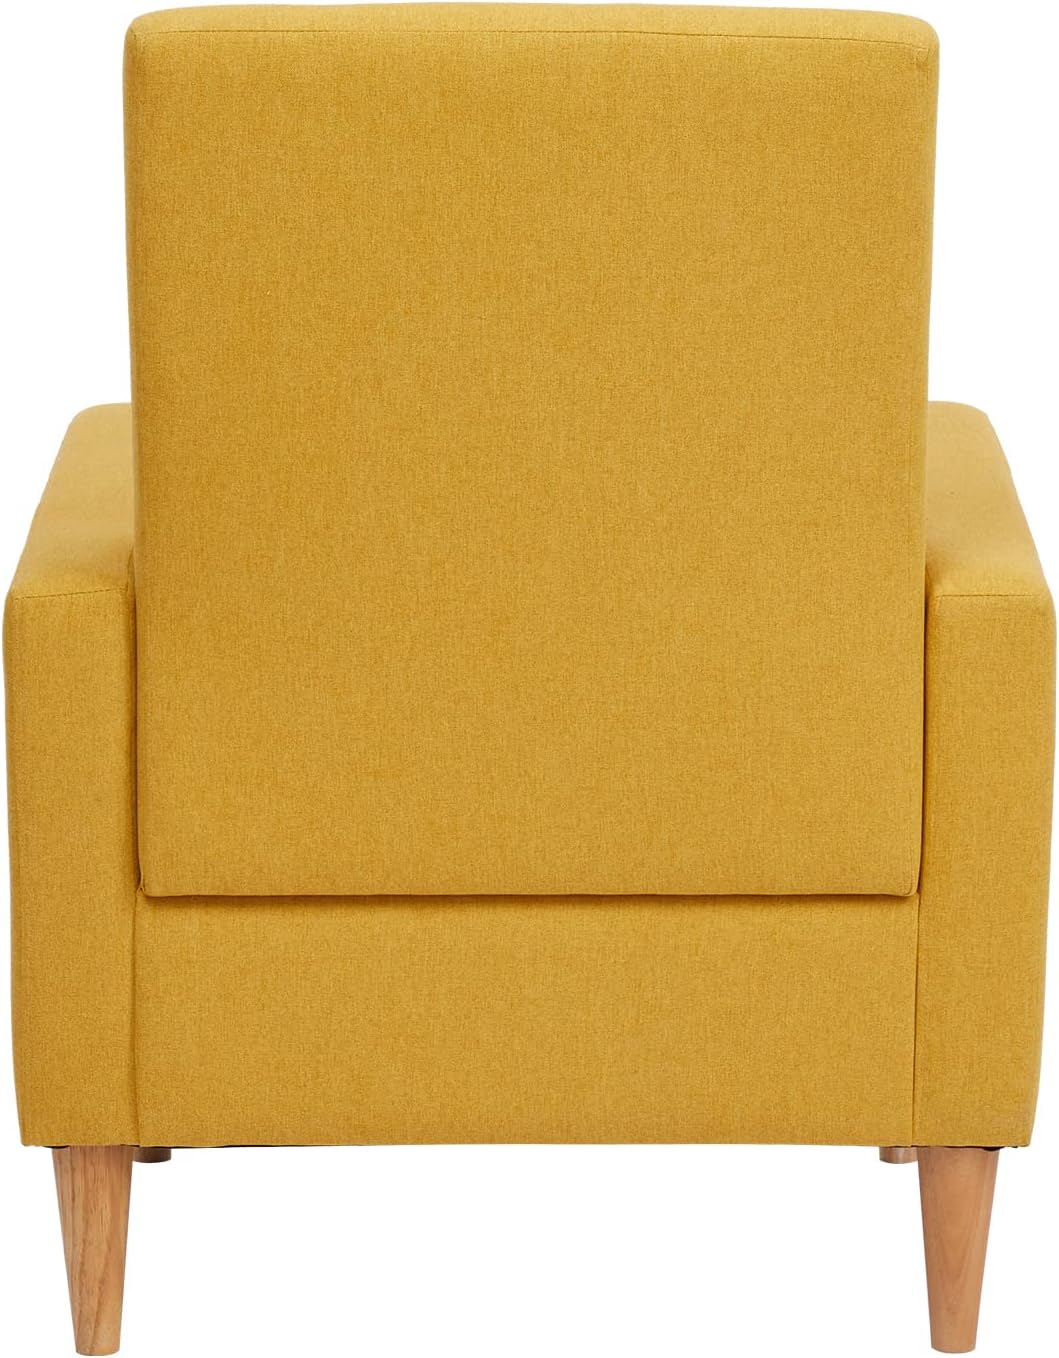 Modern Upholstered Accent Chair Armchair with Pillow, Fabric Reading Living Room Side Chair,Single Sofa with Lounge Seat and Wood Legs,Yellow